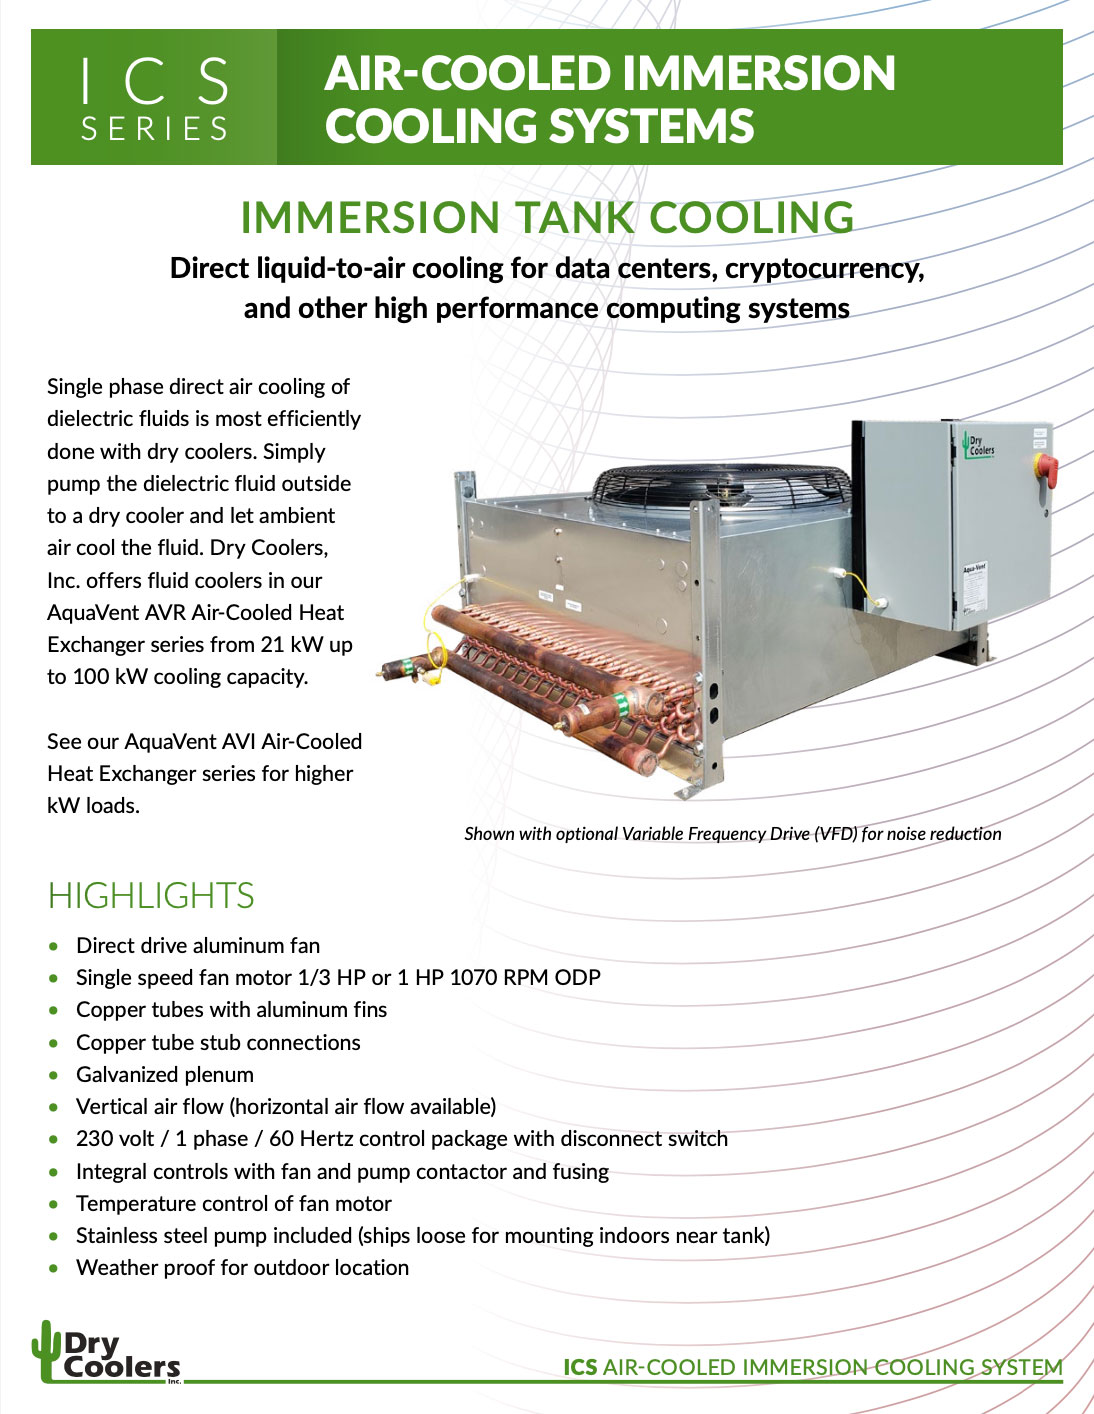 ICS 2205: Air-Cooled Immersion Cooling System